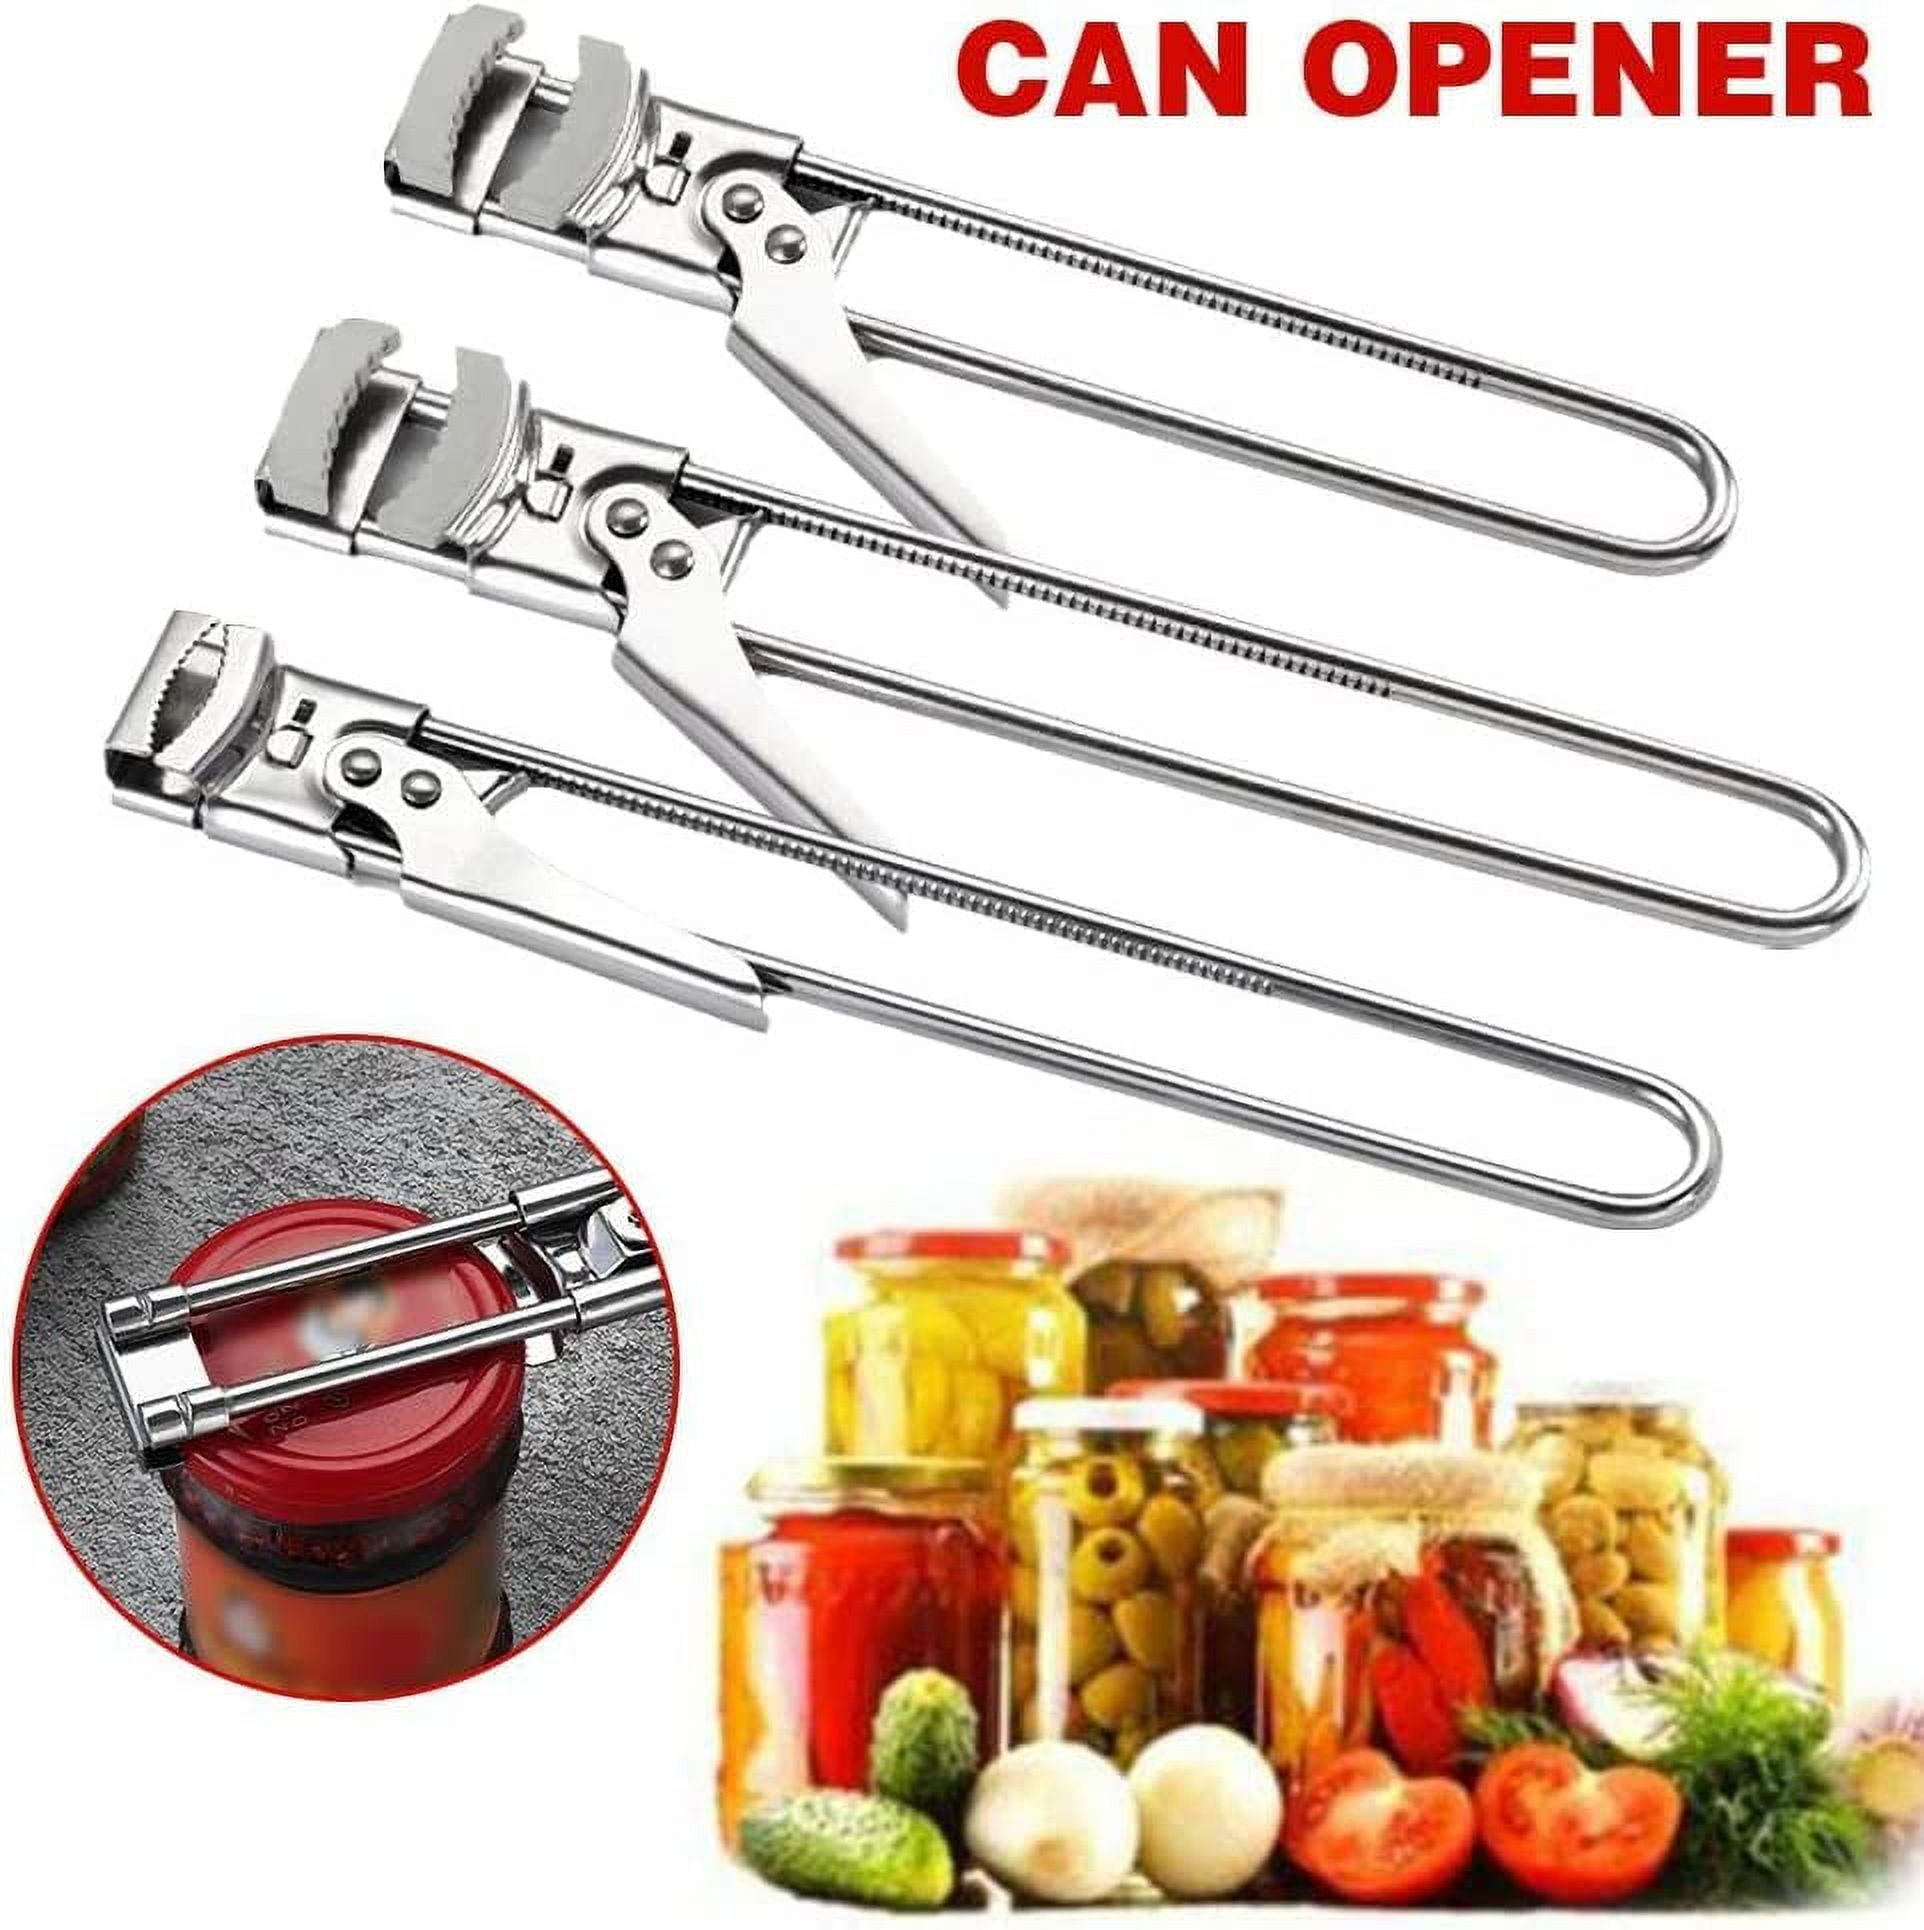  Ailsion Jar Opener,Adjustable Stainless Steel Can Opener Bottle  Opener,Gripper,Manual Bottle Opener,Portable Kitchen Accessories (2,Small  size) : Home & Kitchen